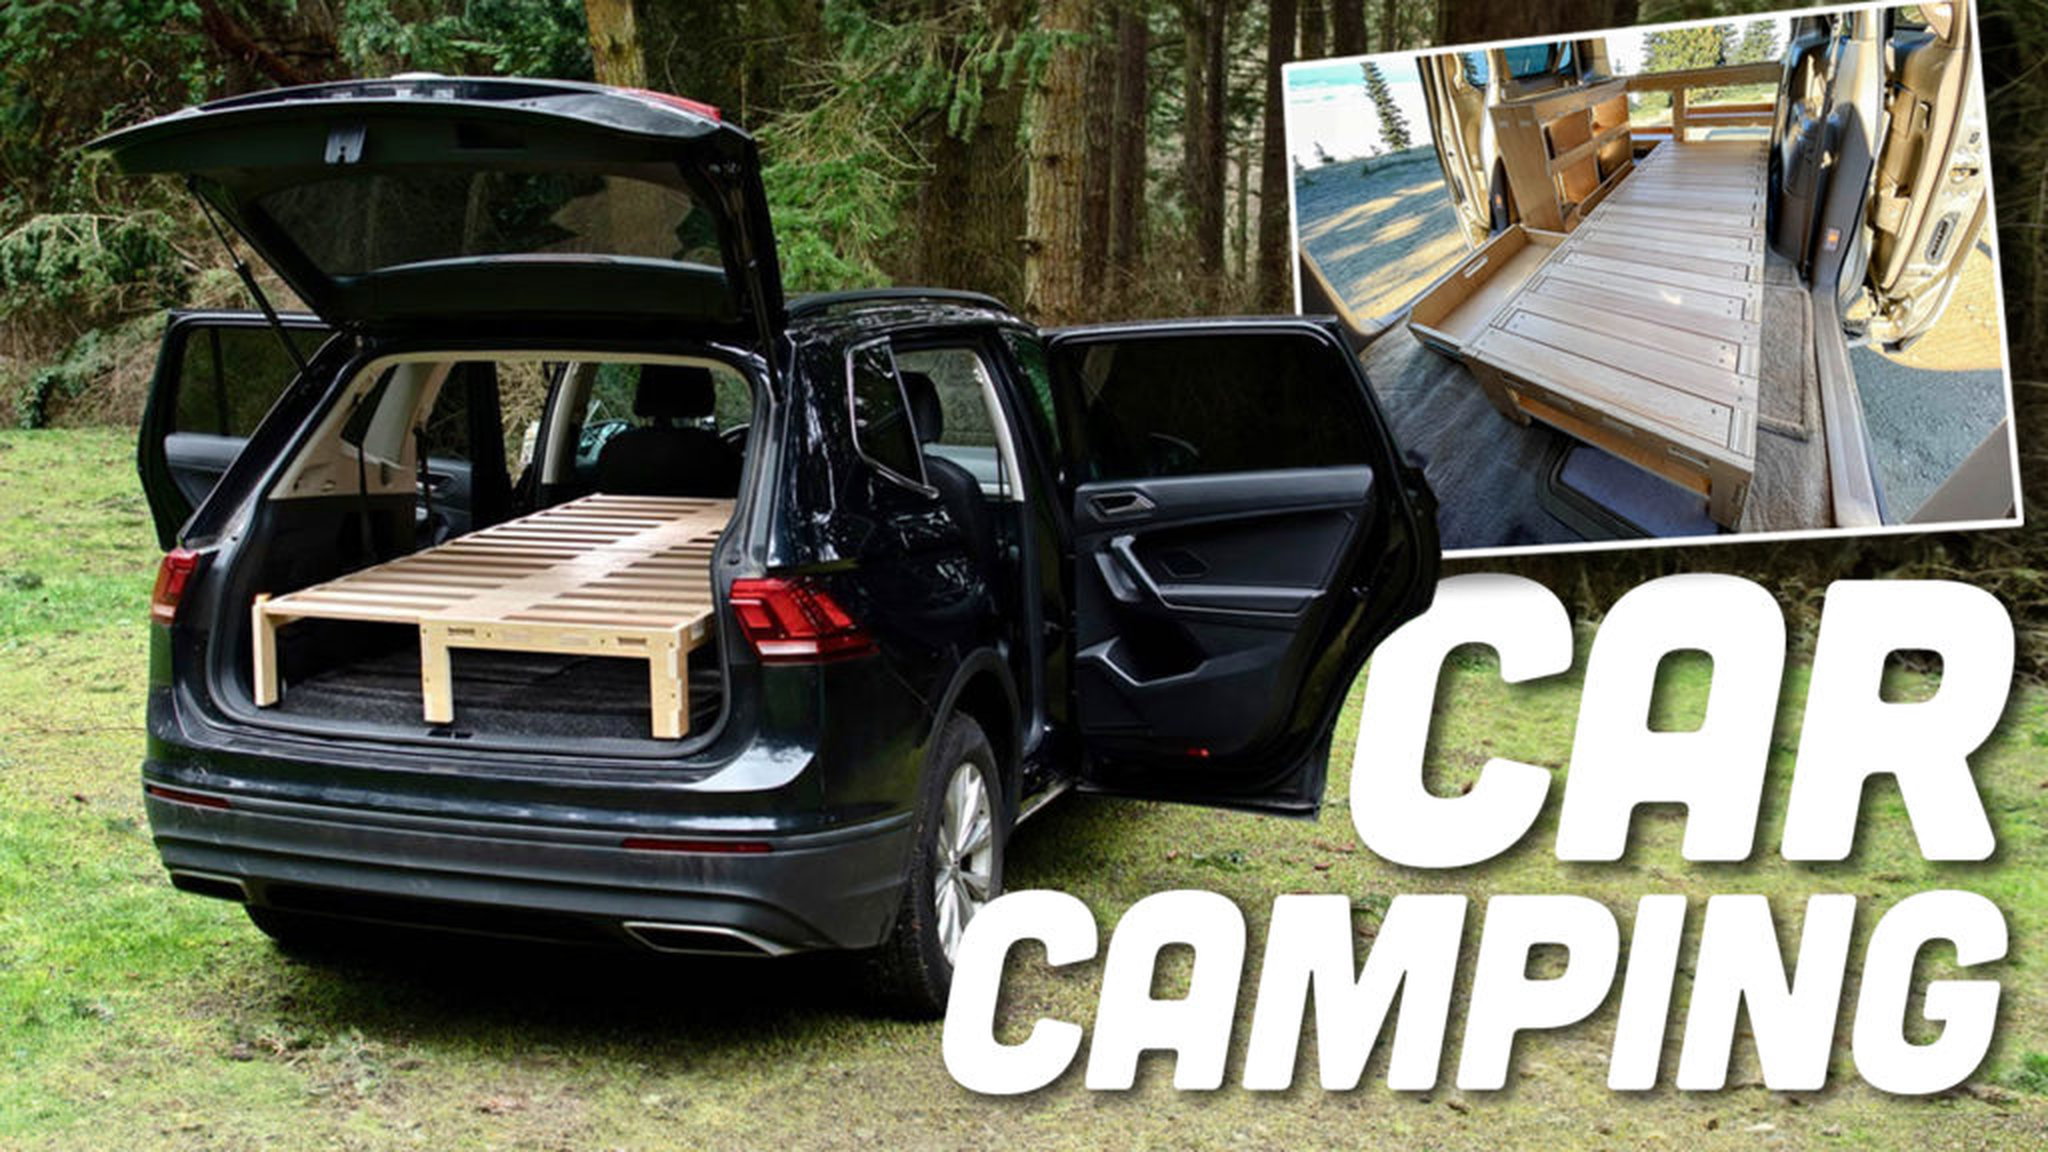 This Cheap $1145 Kit Turns Your Boring Crossover Or Minivan Into A Cozy Camper - The Autopian